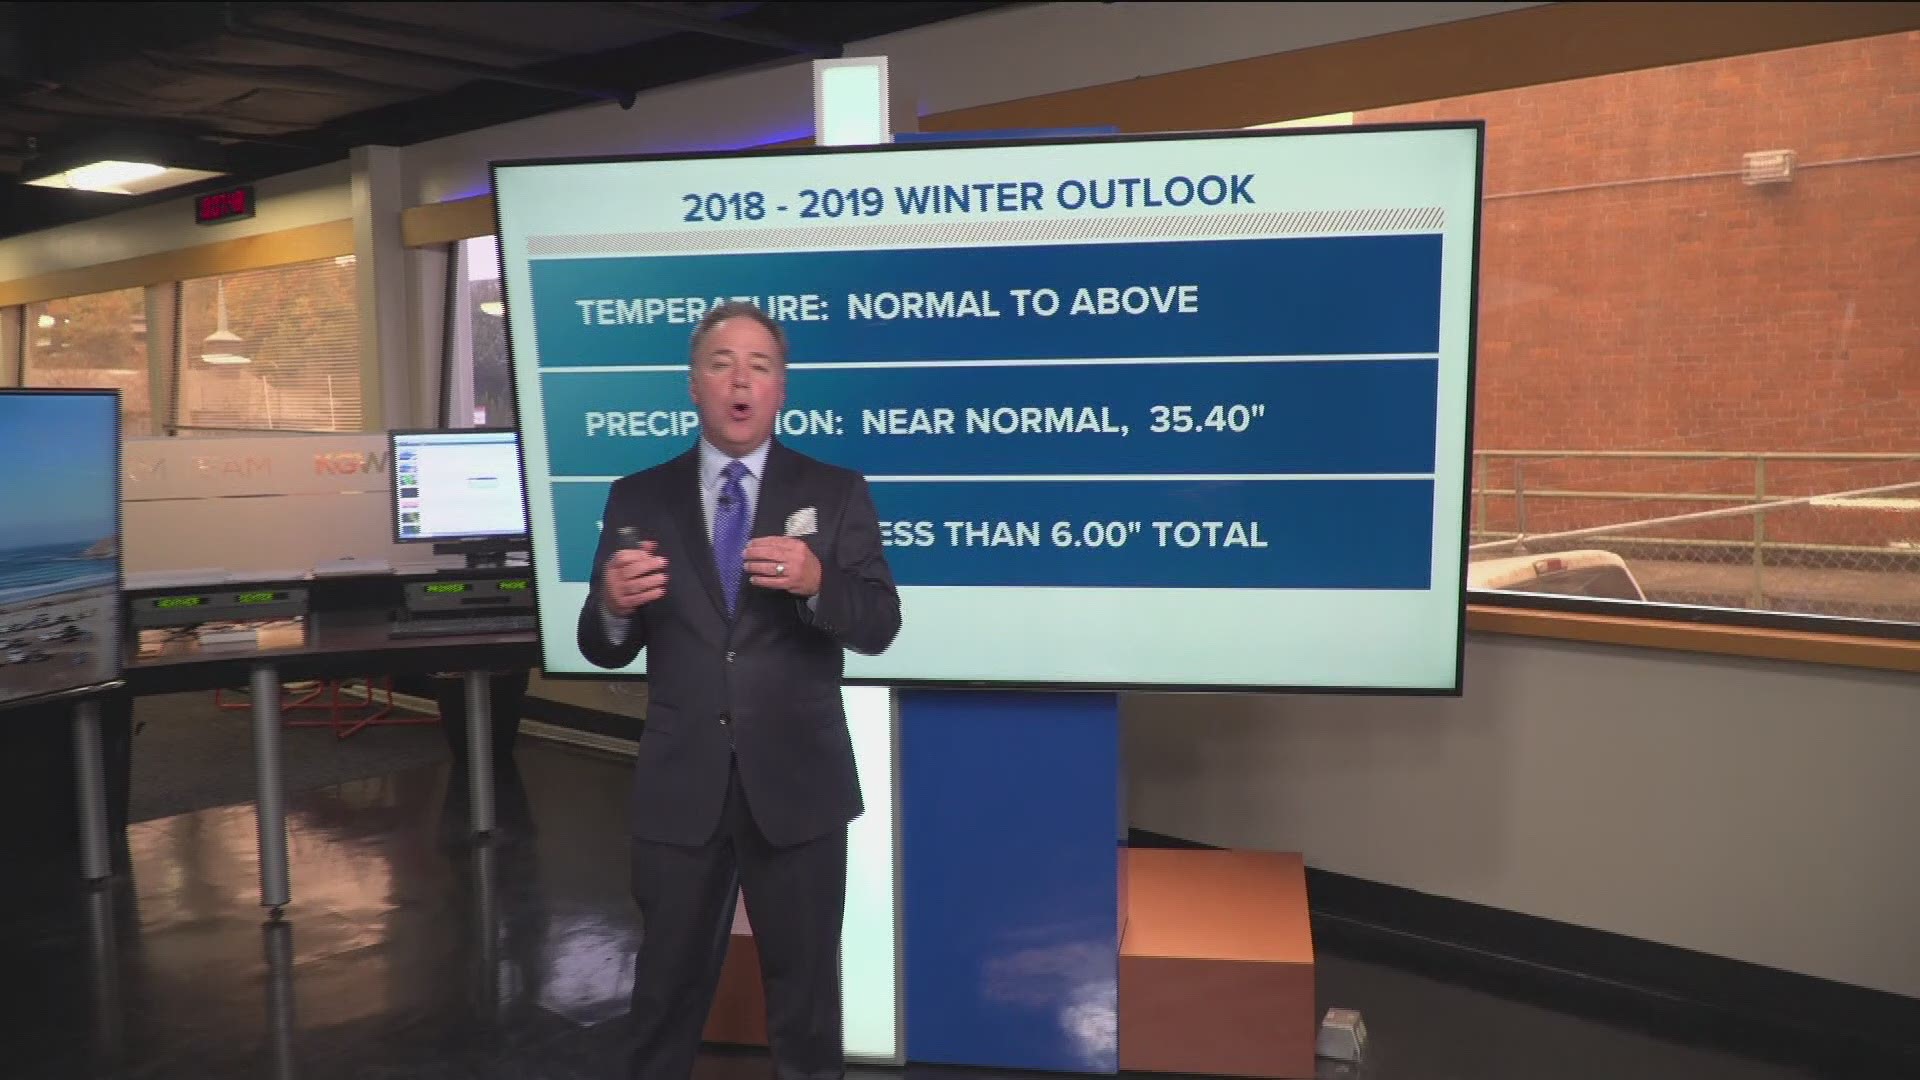 Here's a breakdown of what to expect in the way of temperature, precipitation, valley snow, valley wind and Mount hood snowpack for winter 2018-2019.